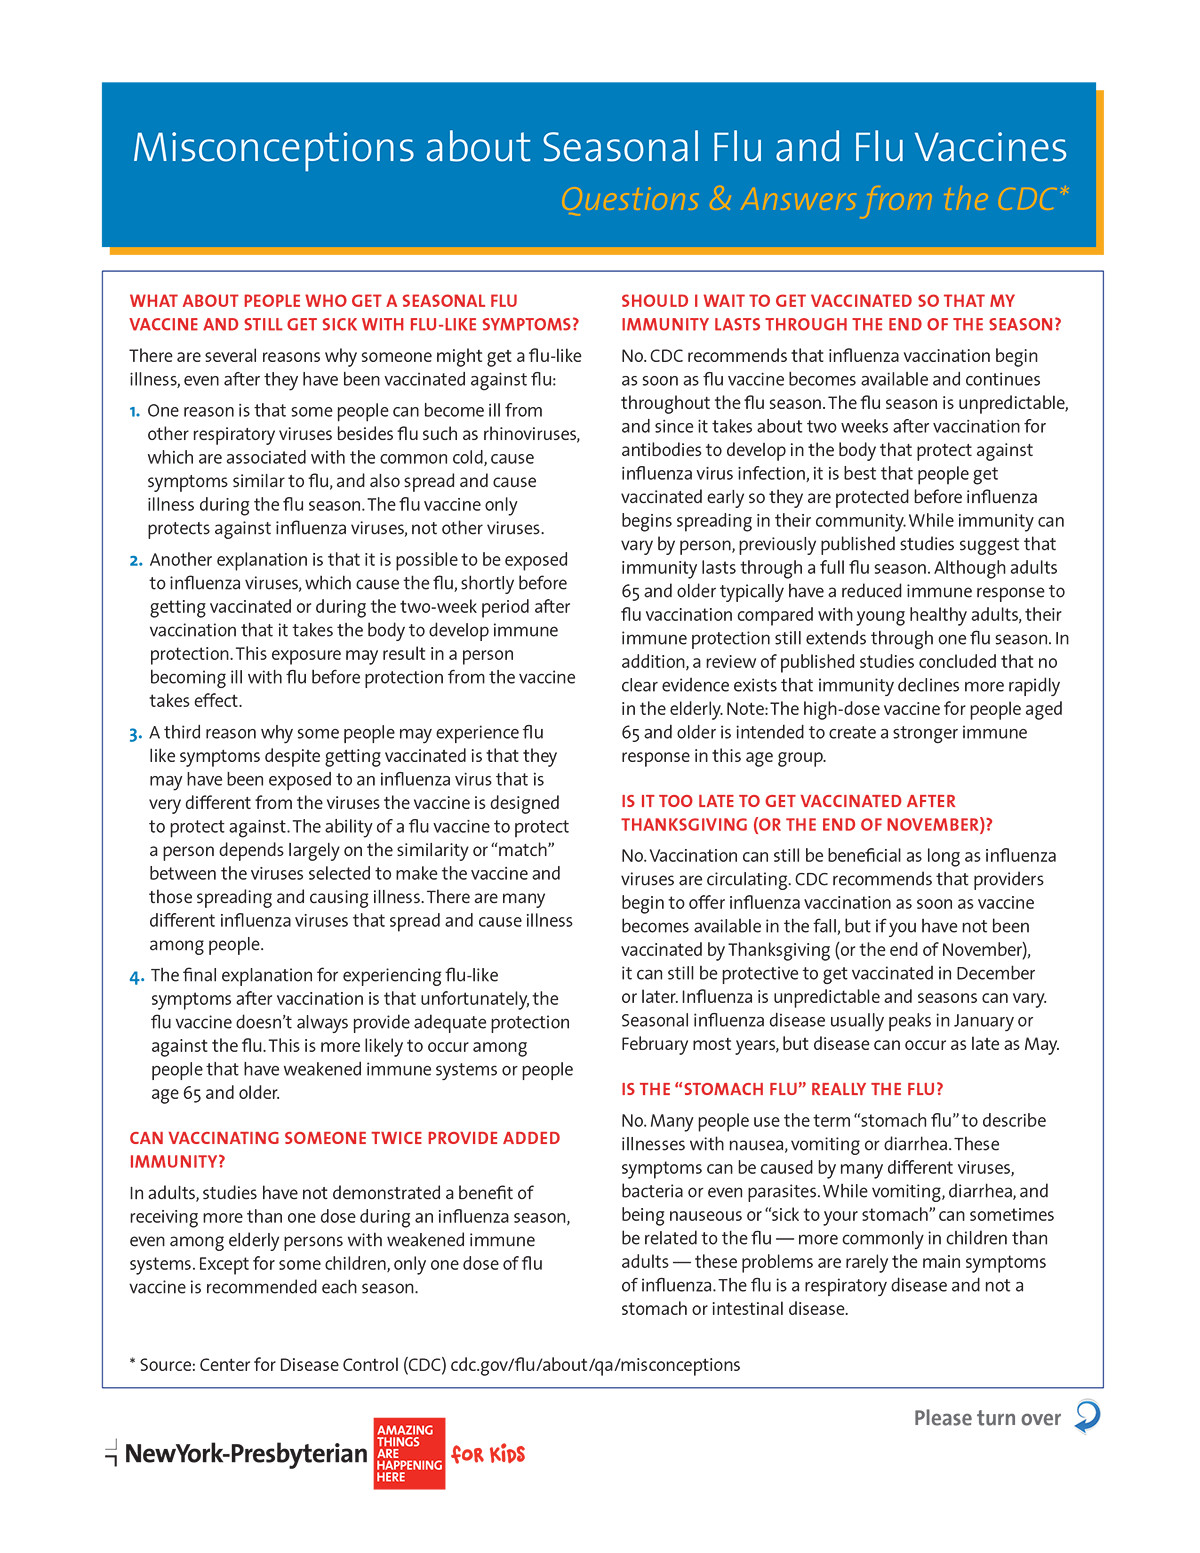 Misconceptions about Seasonal Flu and Flu Vaccines |Tip Sheets | NewYork-Presbyterian